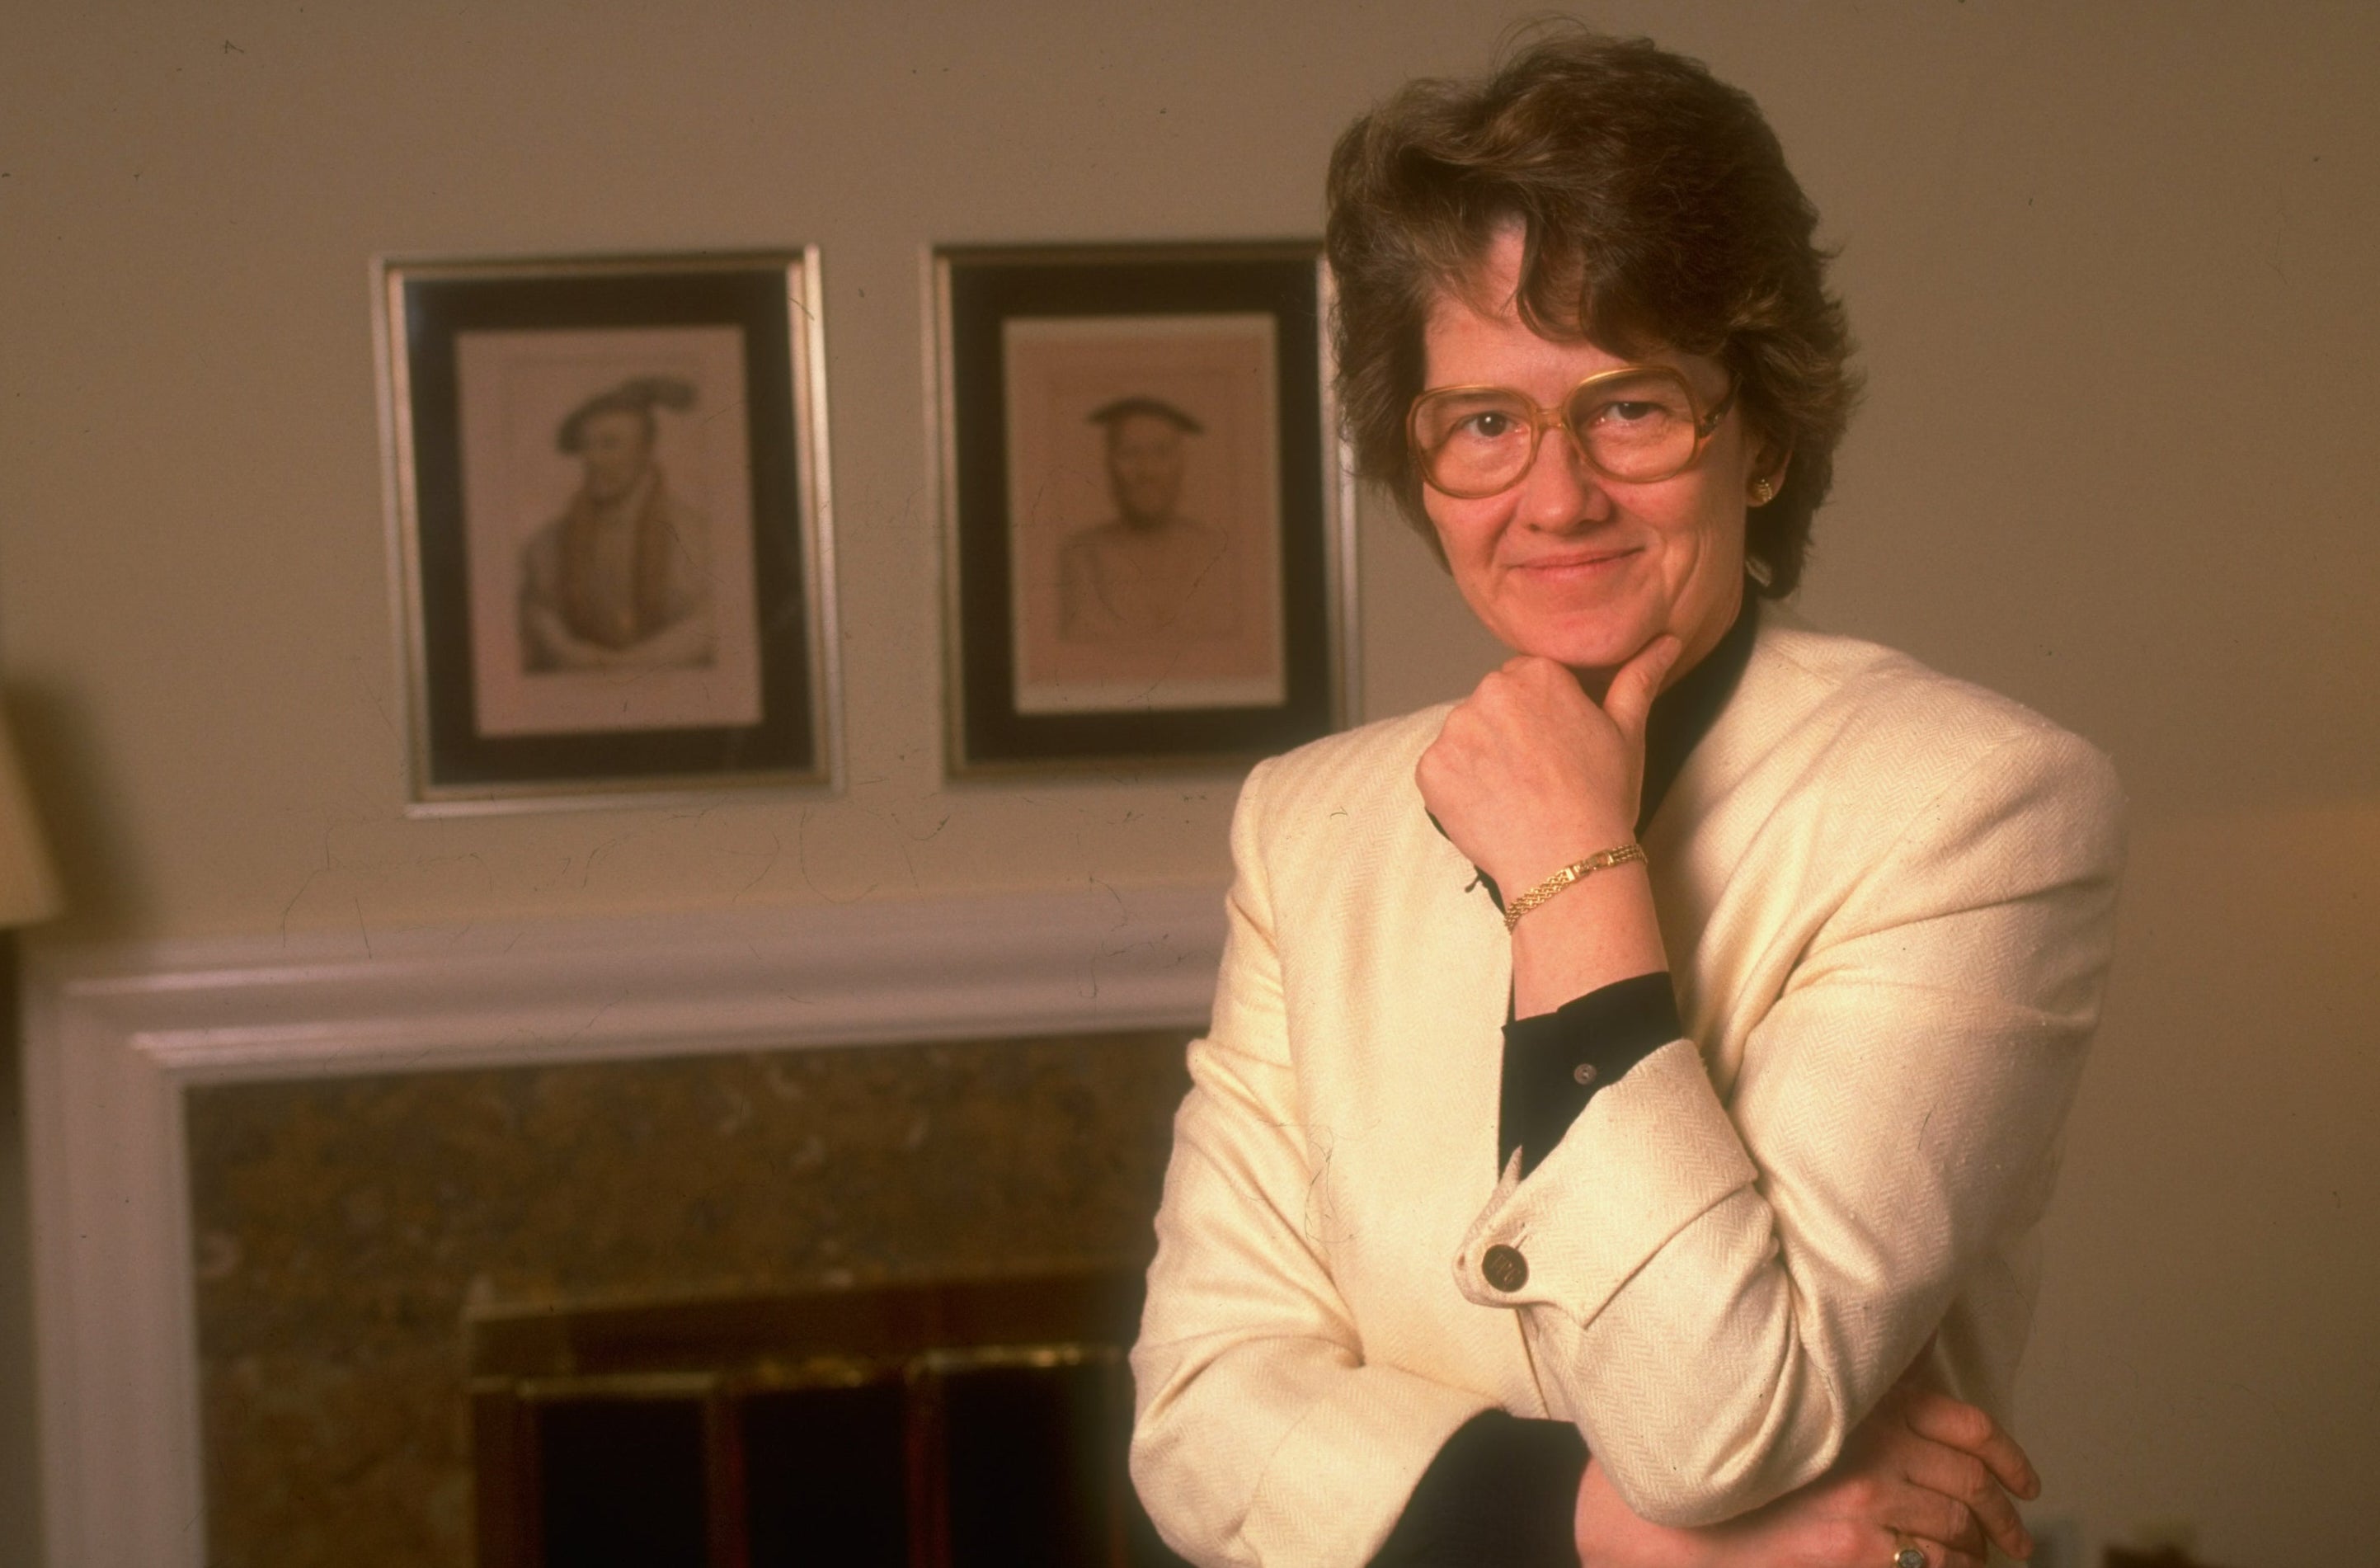 Hopkins made history in 1989 when she sued Price Waterhouse for sex discrimination because partnership was denied her